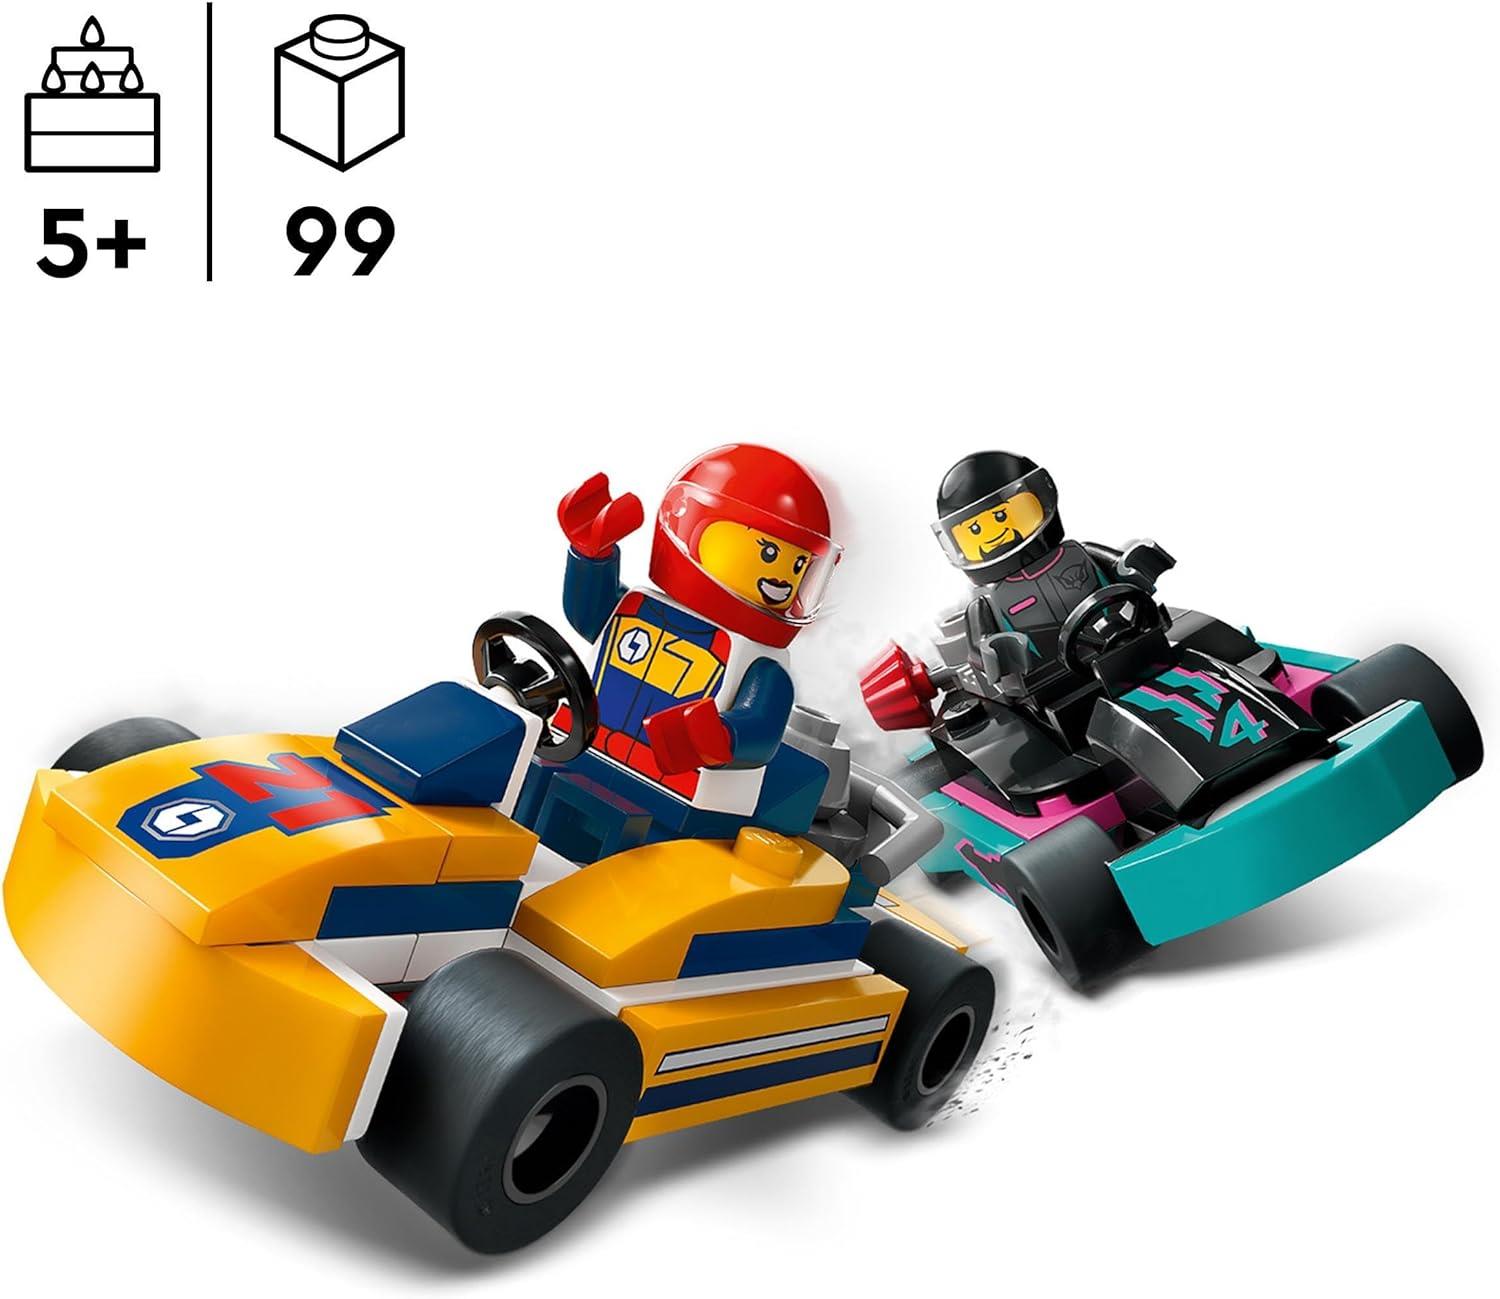 Lego City 60400 Go-Karts and Race Drivers